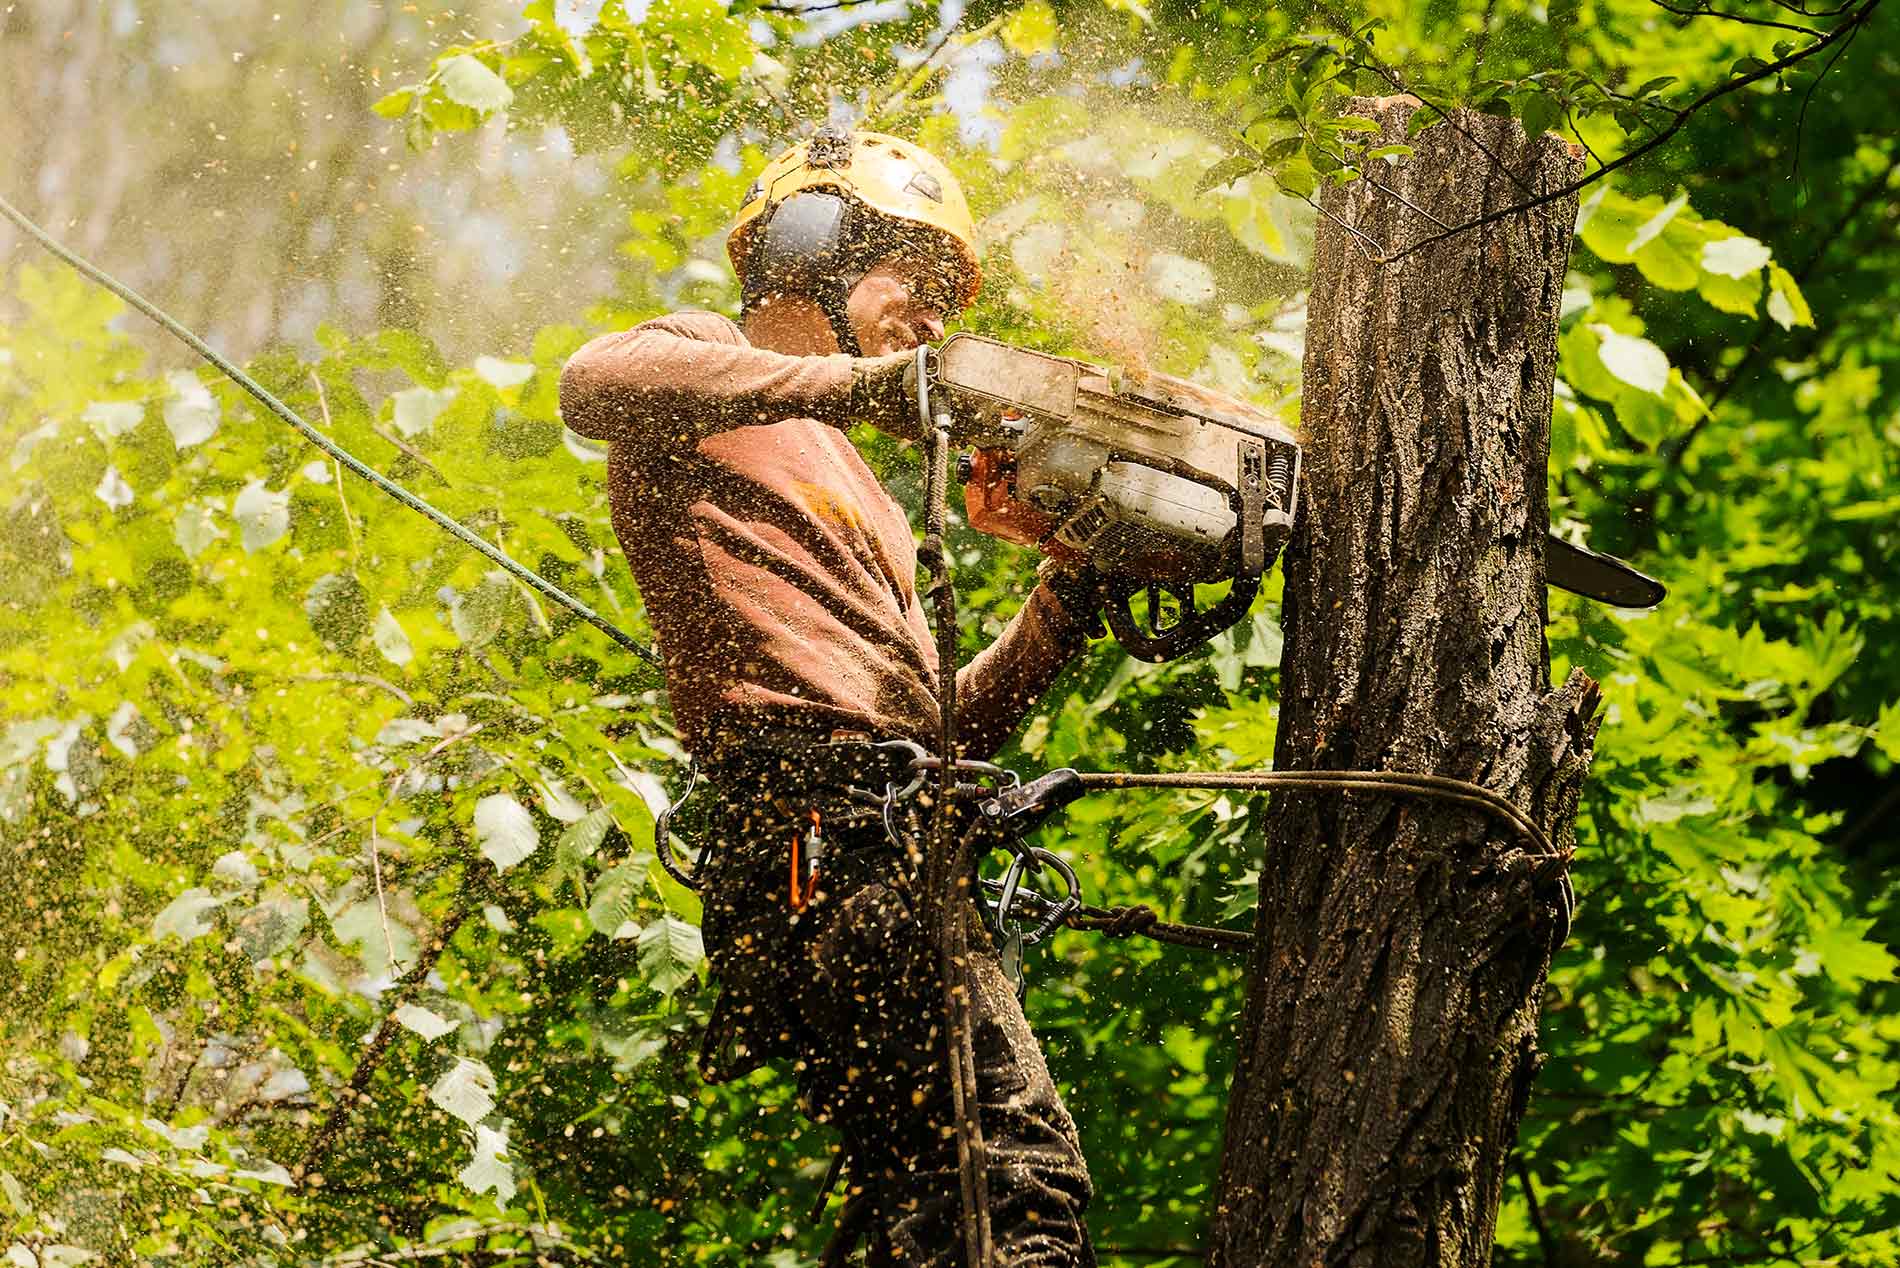 Tree Service, Landscaping, and Hardscaping in Milford, NJ